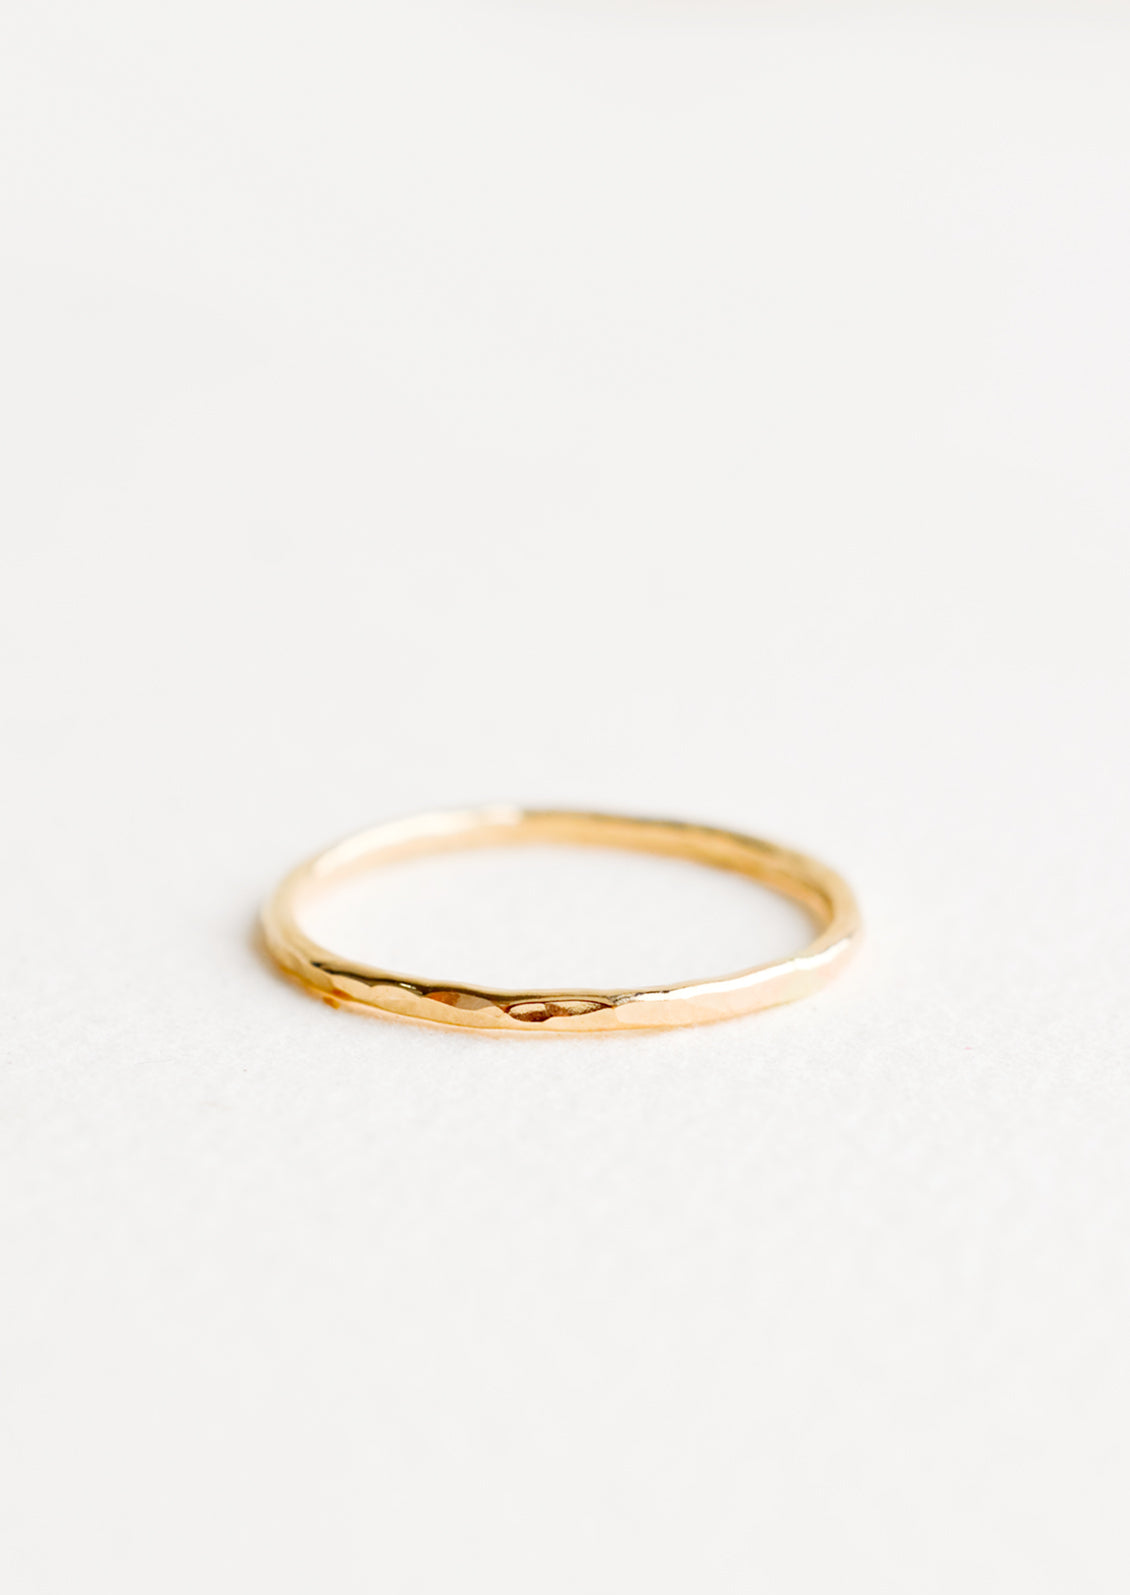 Hammered Stacking Ring - Size 5